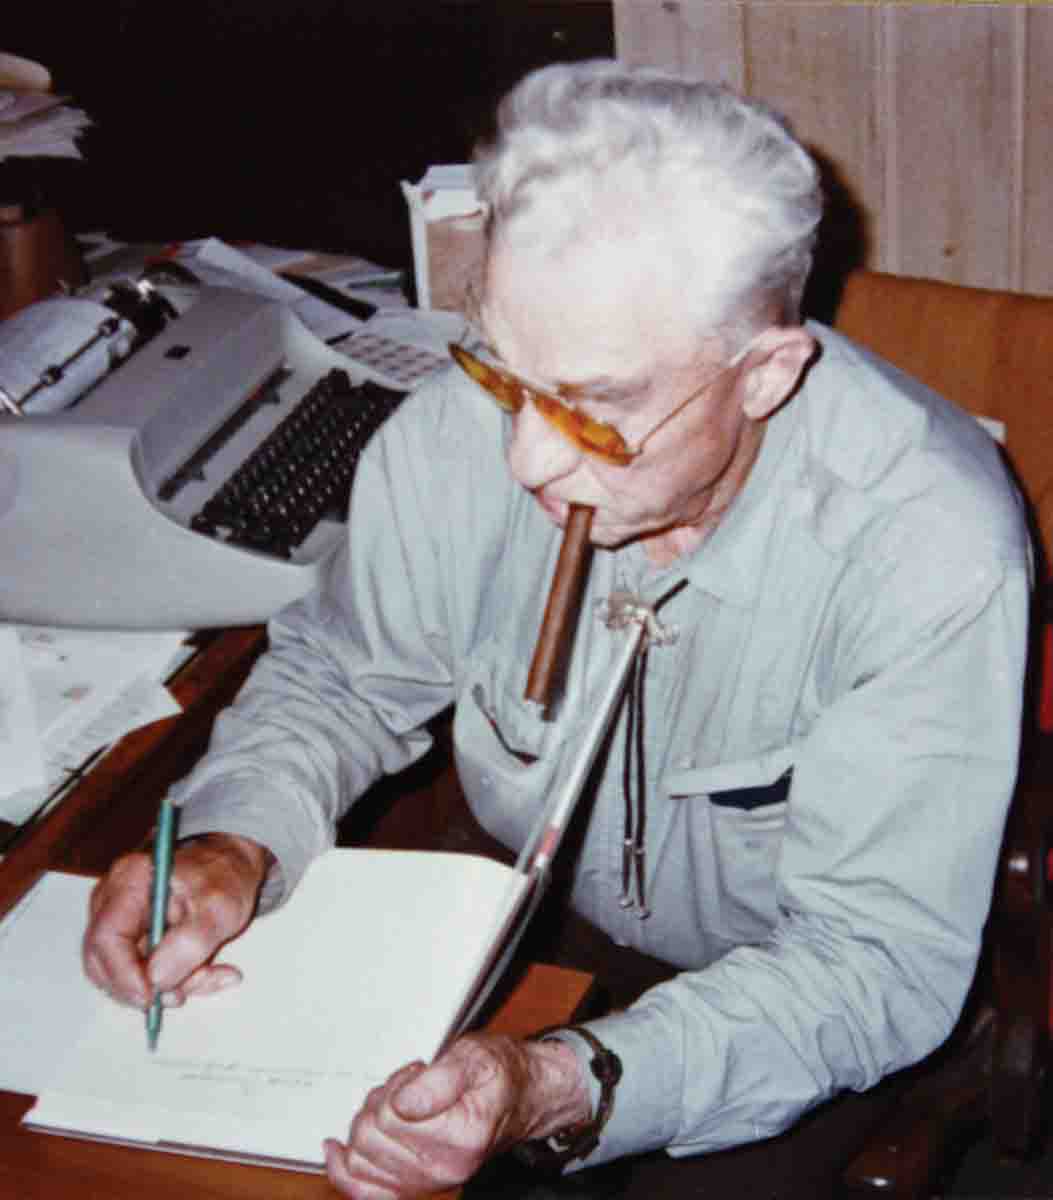 Elmer Keith, with his ever-present cigar, autographing one of his books.